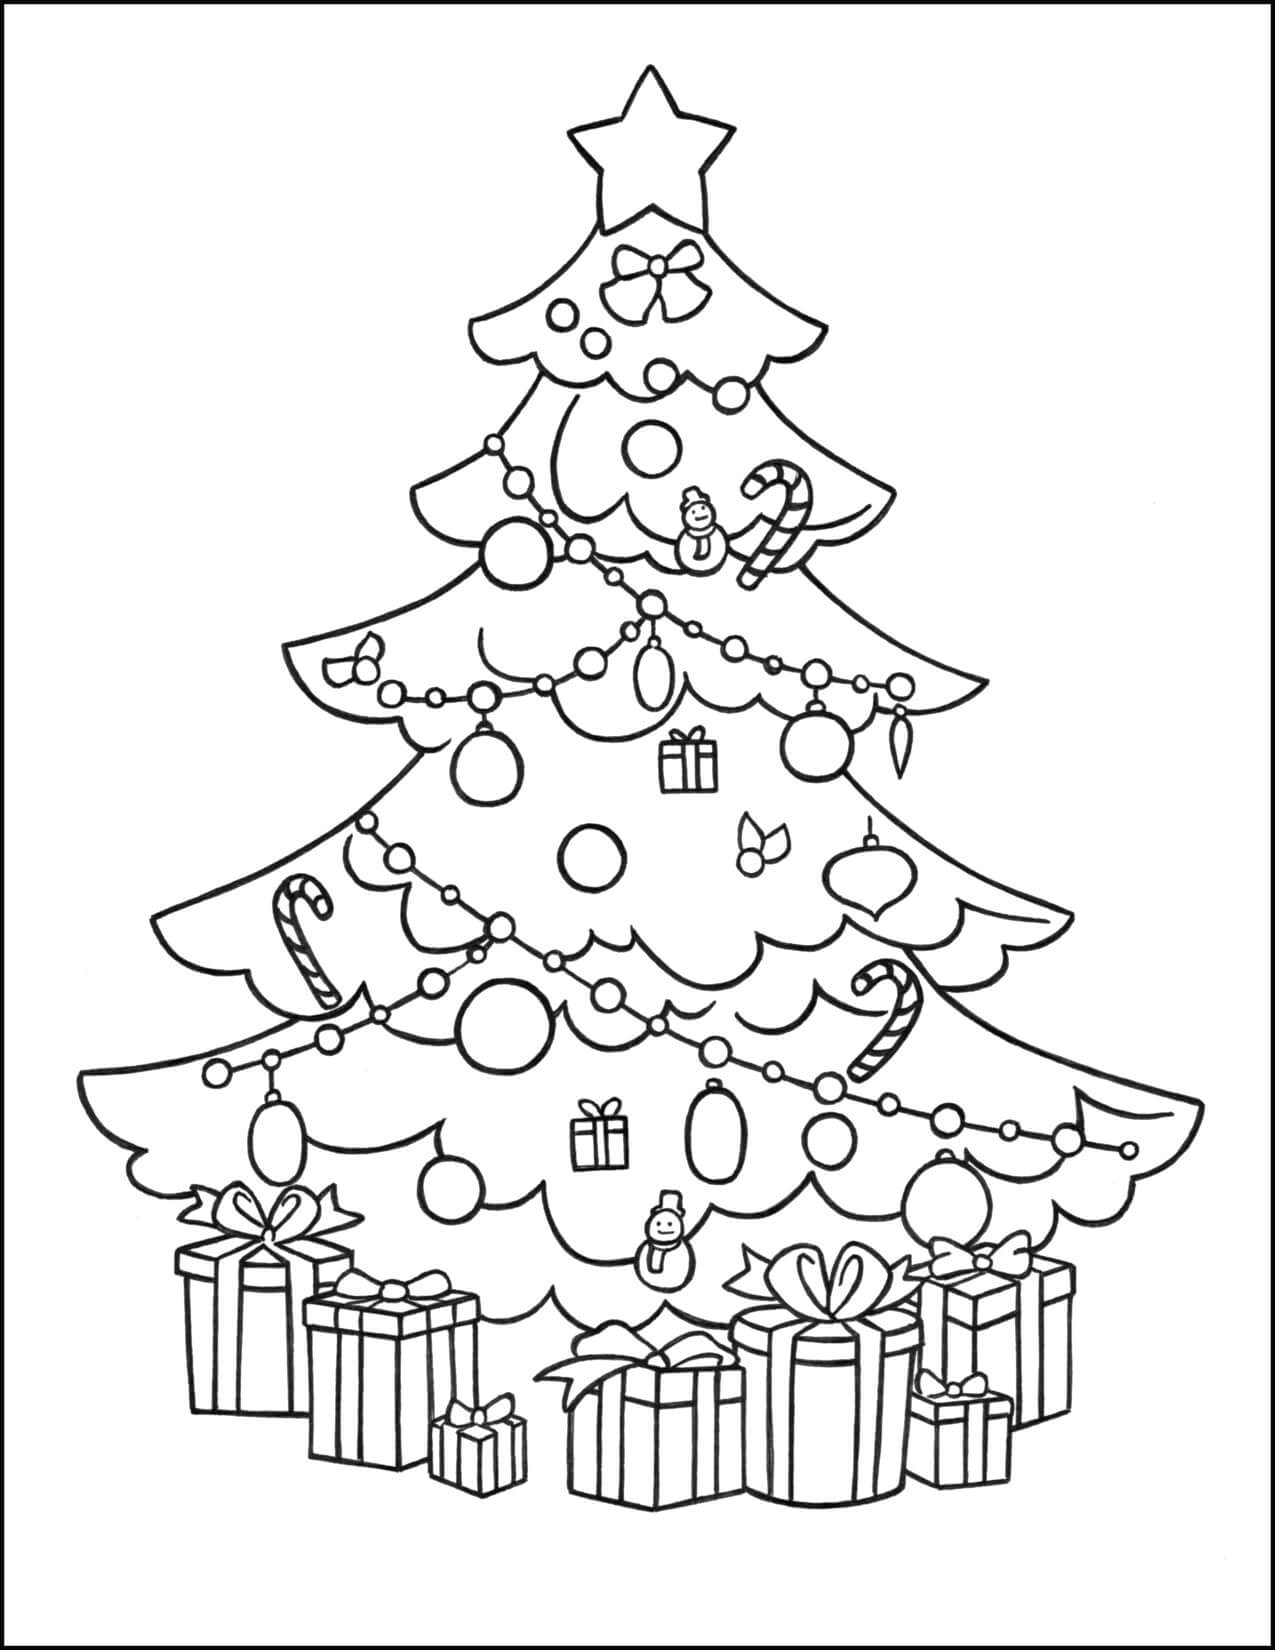 Coloring Pages Christmas Tree - Coloring pages for kids